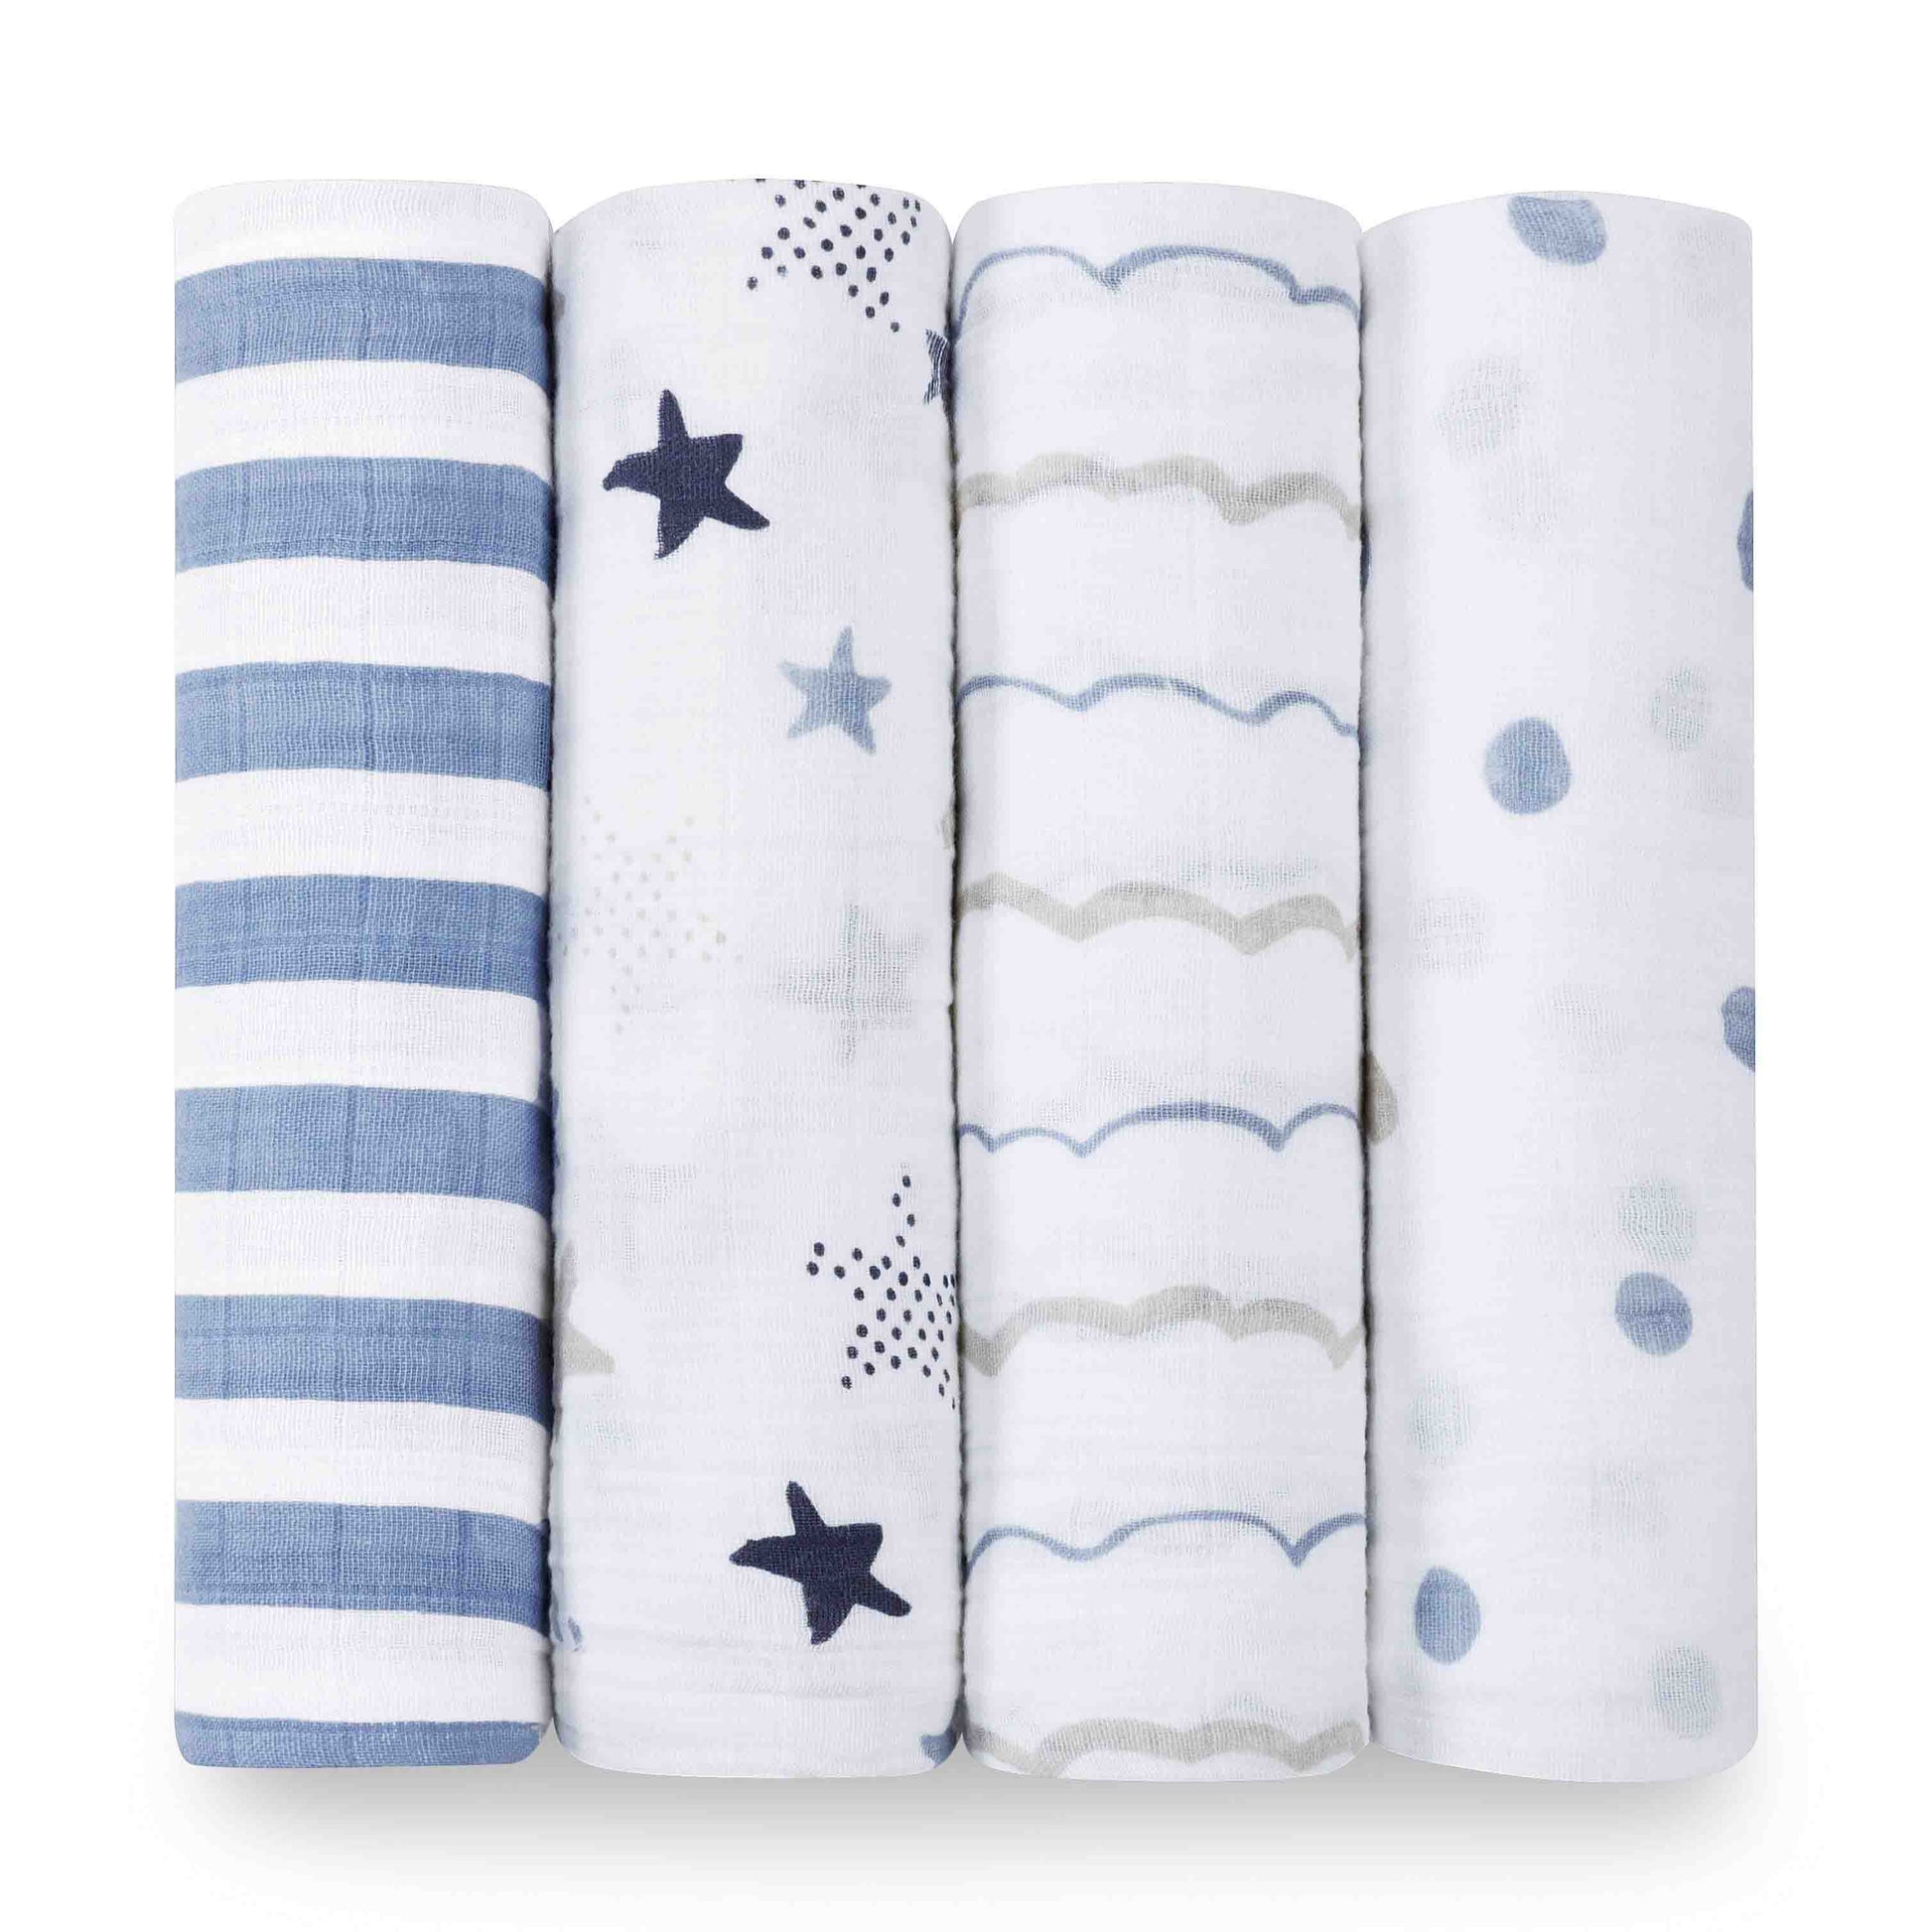 aden + anais Kids accessories Rock Star Swaddle Set 4 Pack - Ever Simplicity